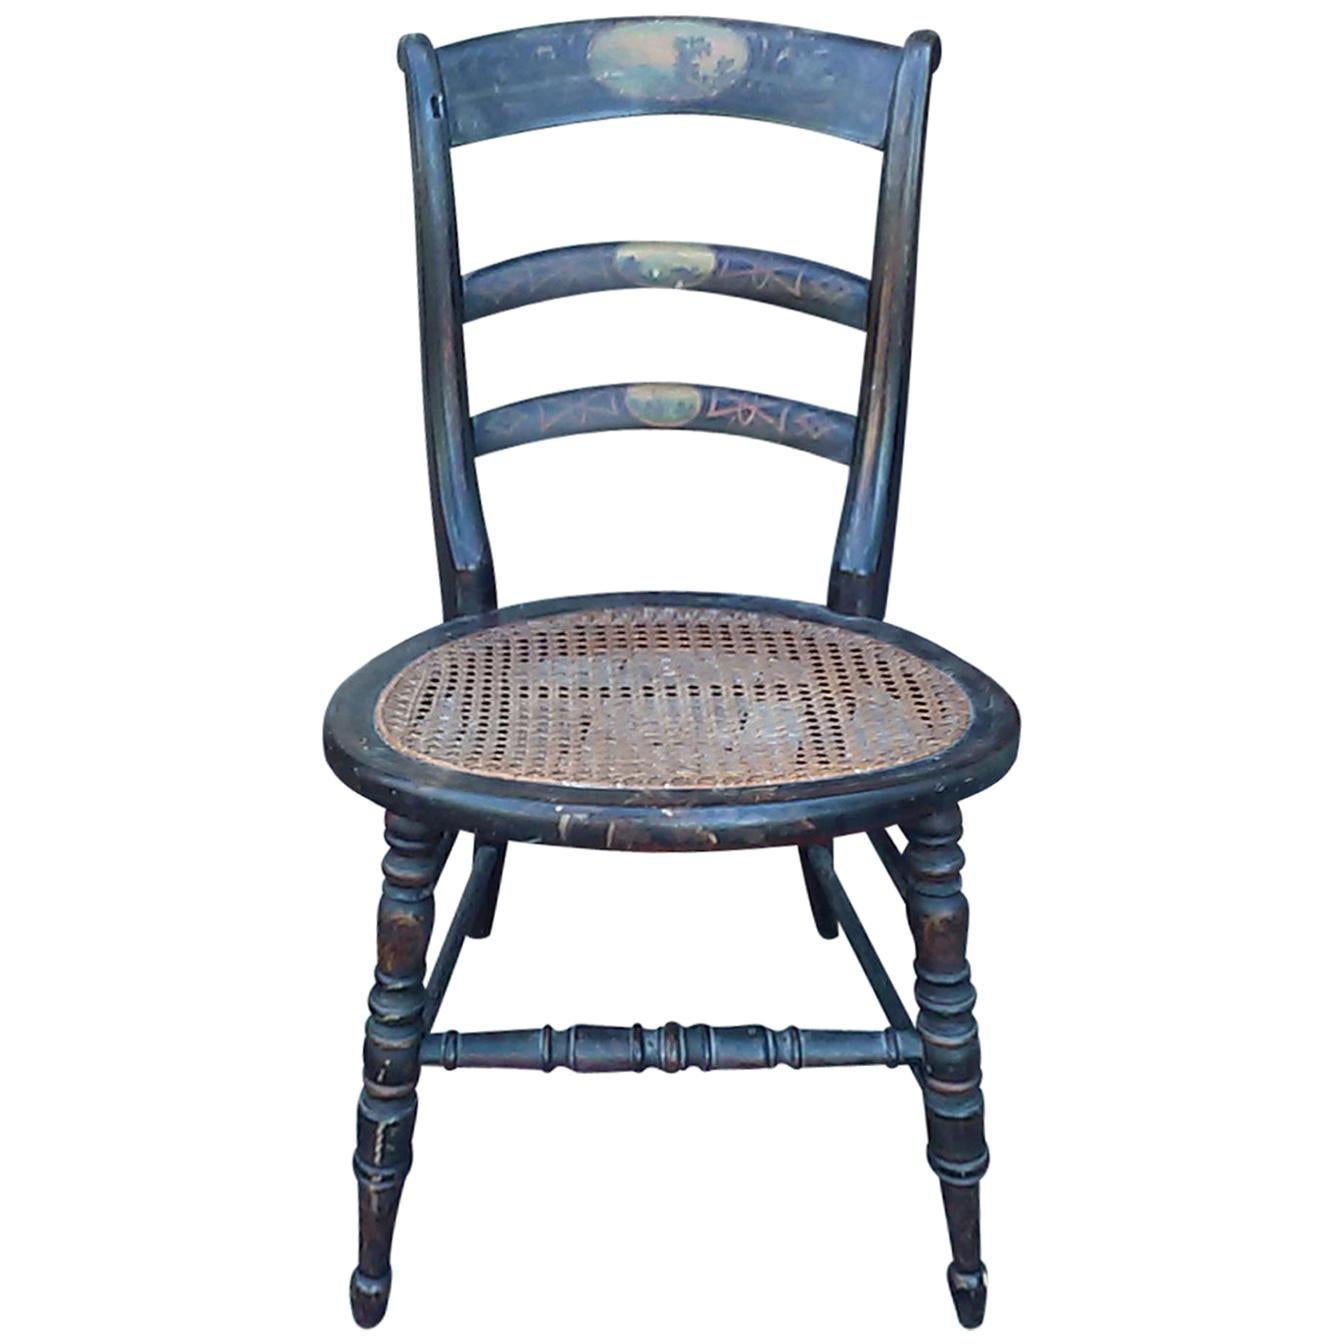 19th Century American Child's Chair Cane Seat, Painted Scenes, Original Paint For Sale